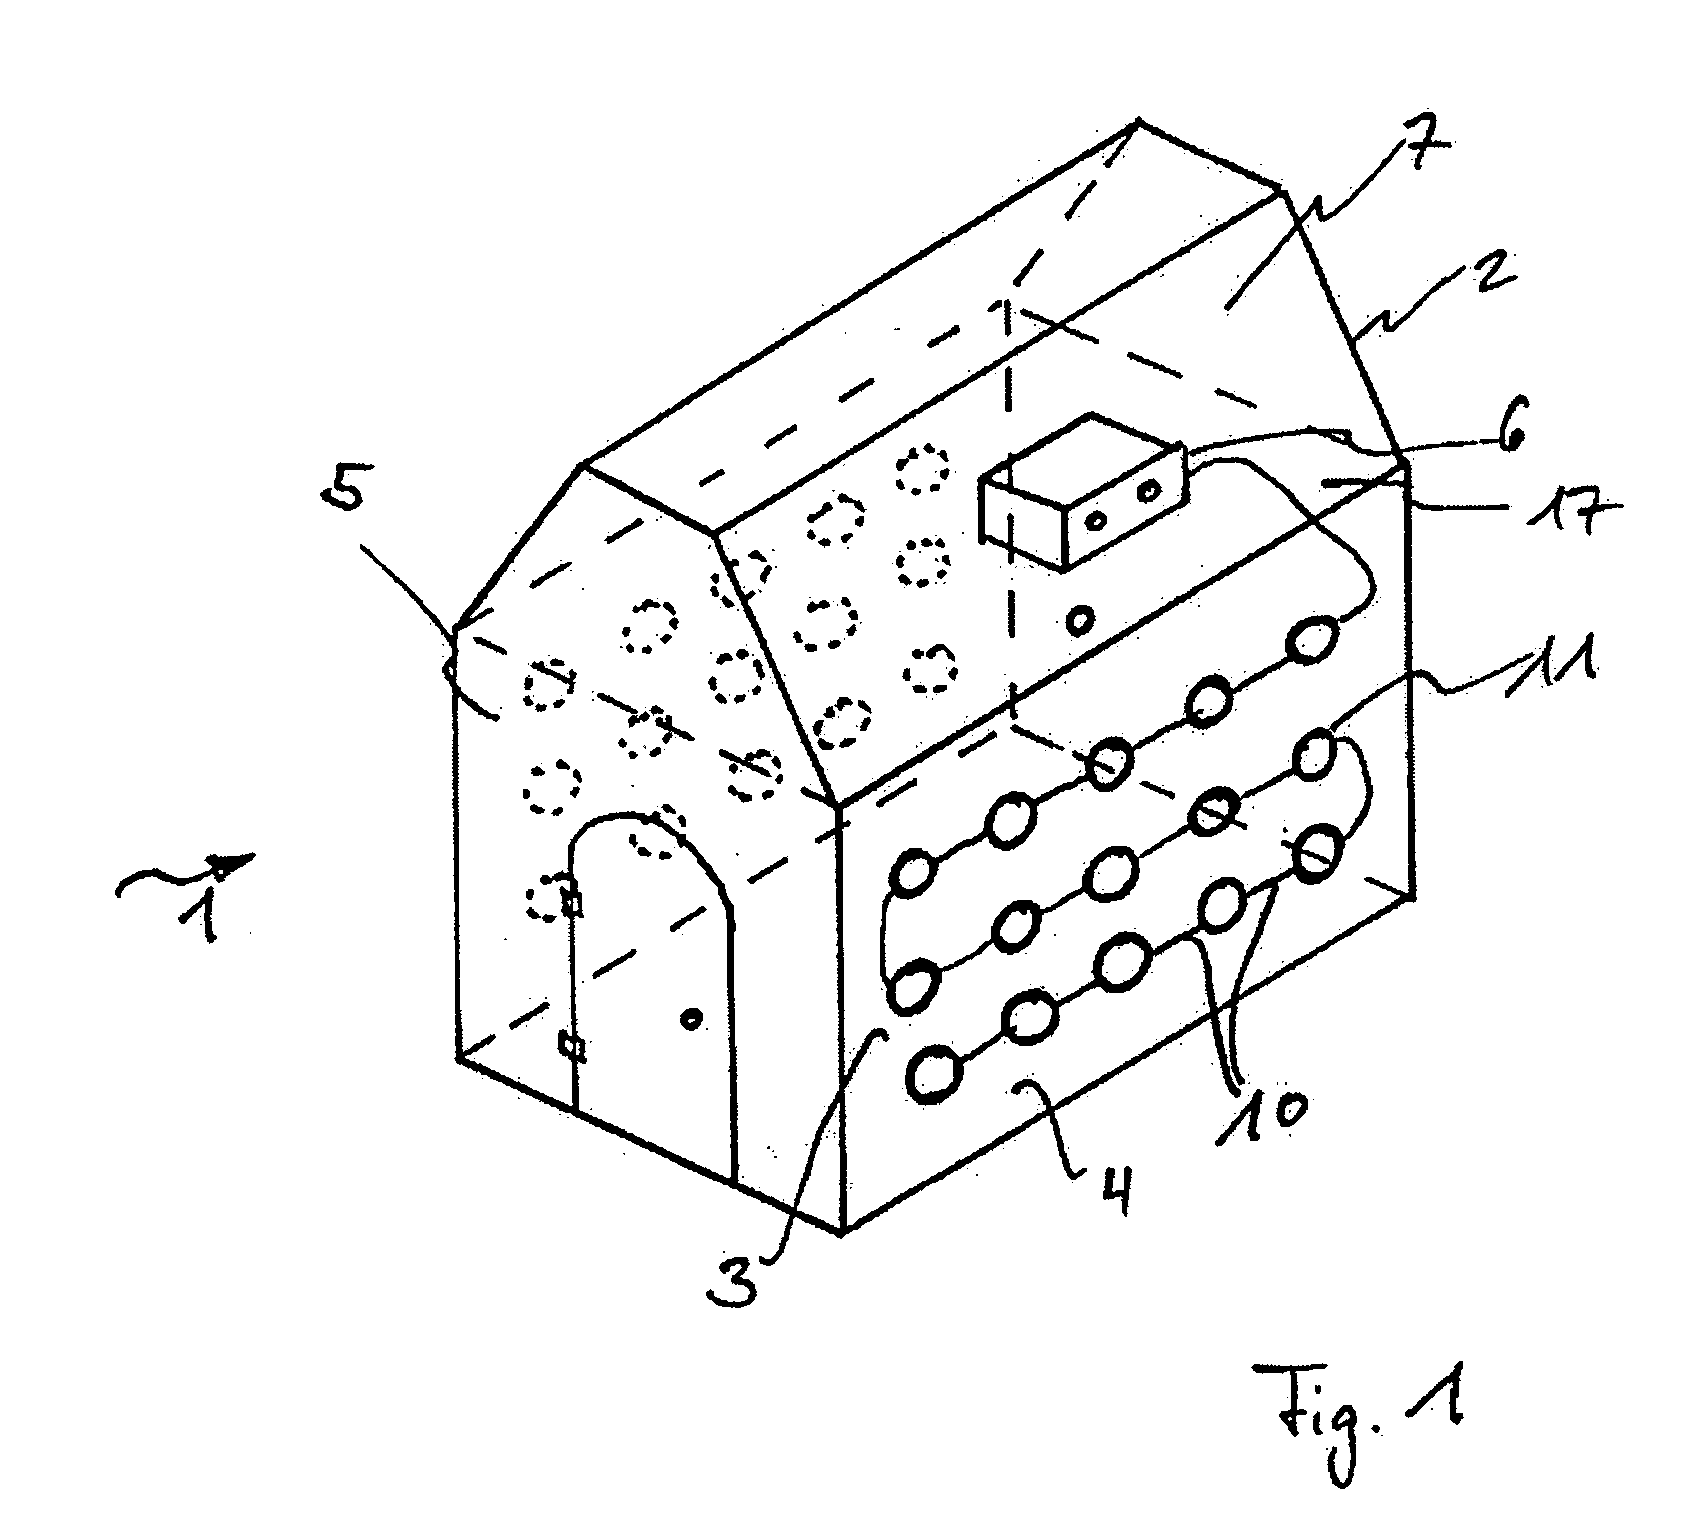 Application device for magnetic field treatment